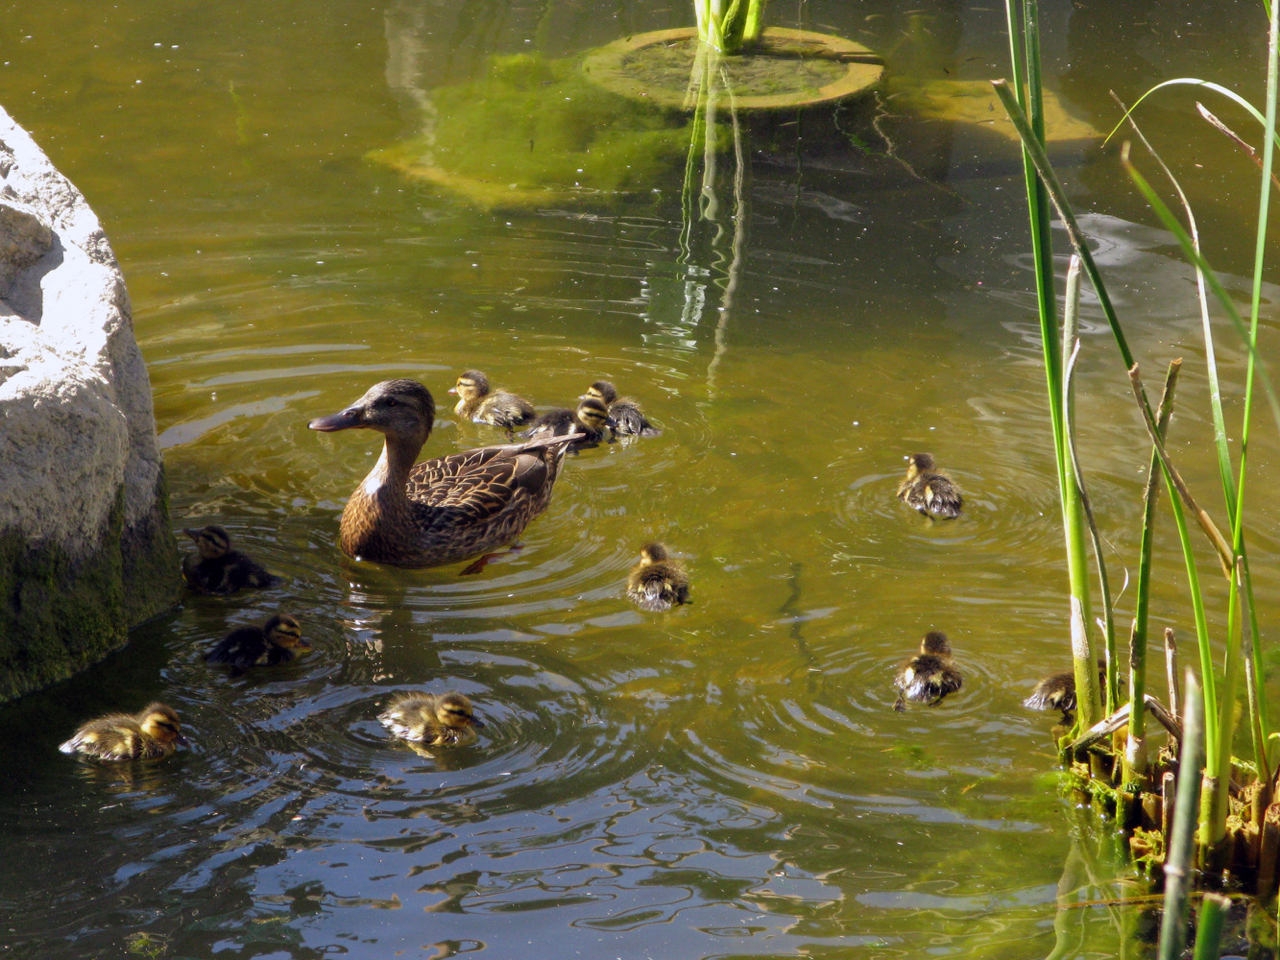 At a whopping eleven ducklings, this is the largest hatching we've ever had. Check out the flickr set for more photos.